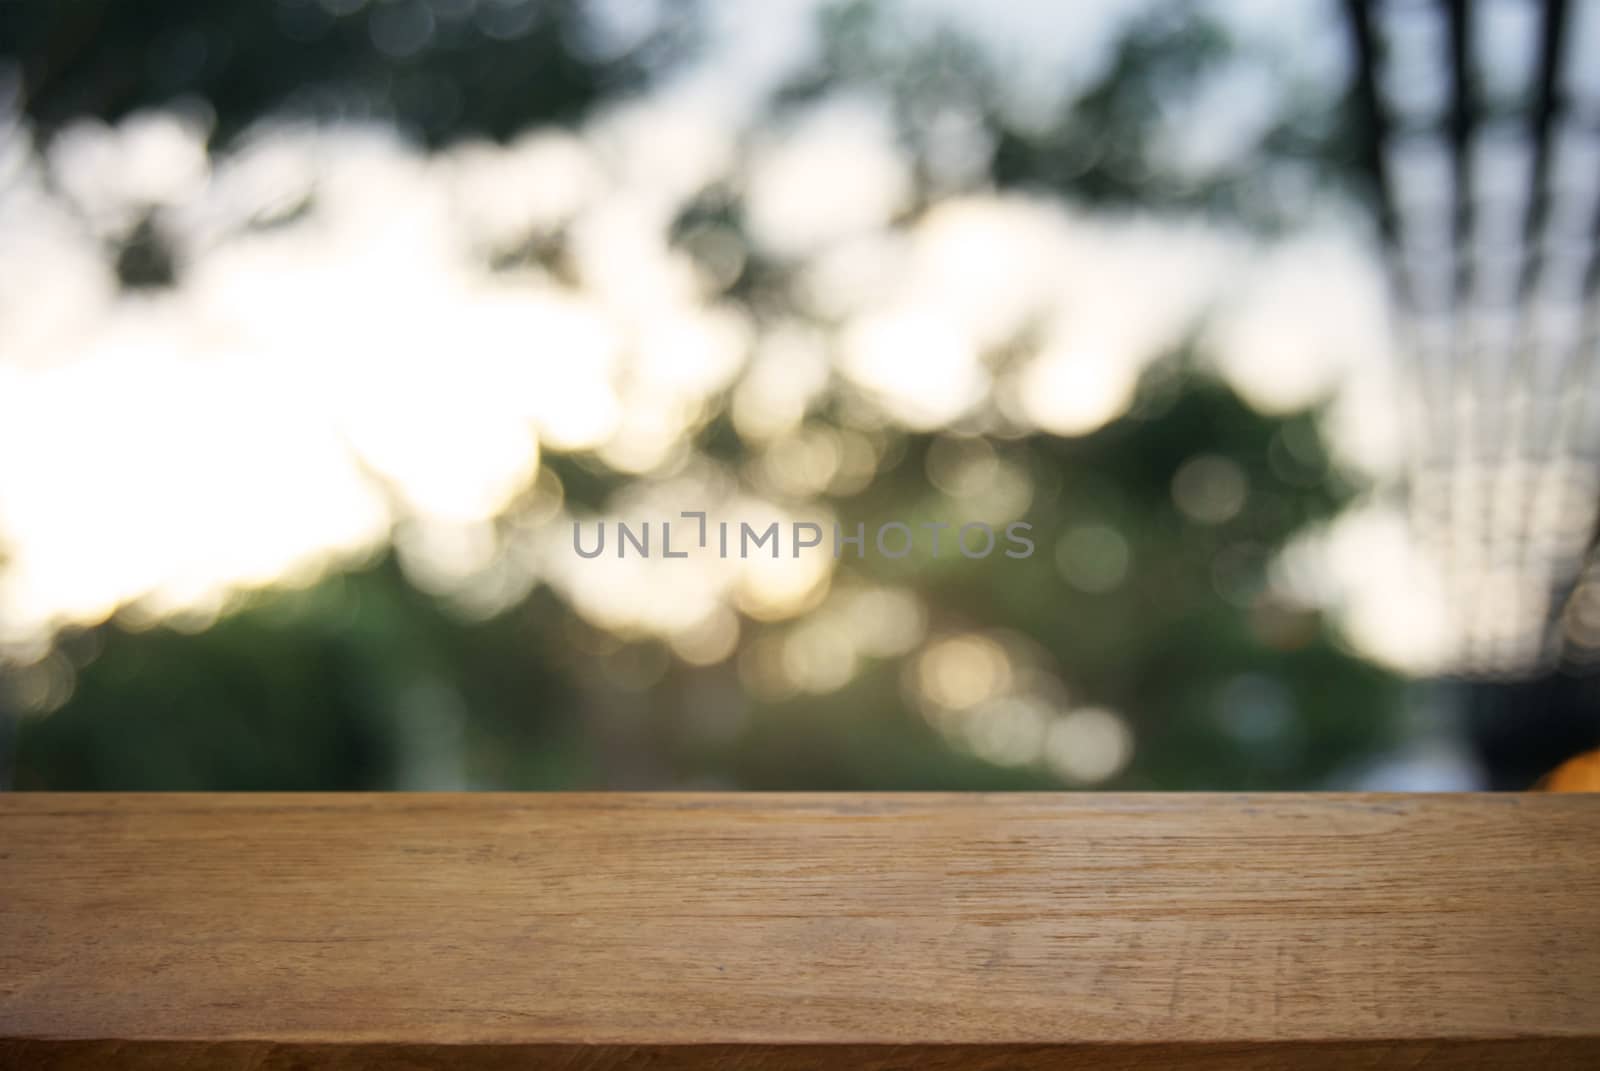 image of wooden table in front of abstract blurred background of by peandben